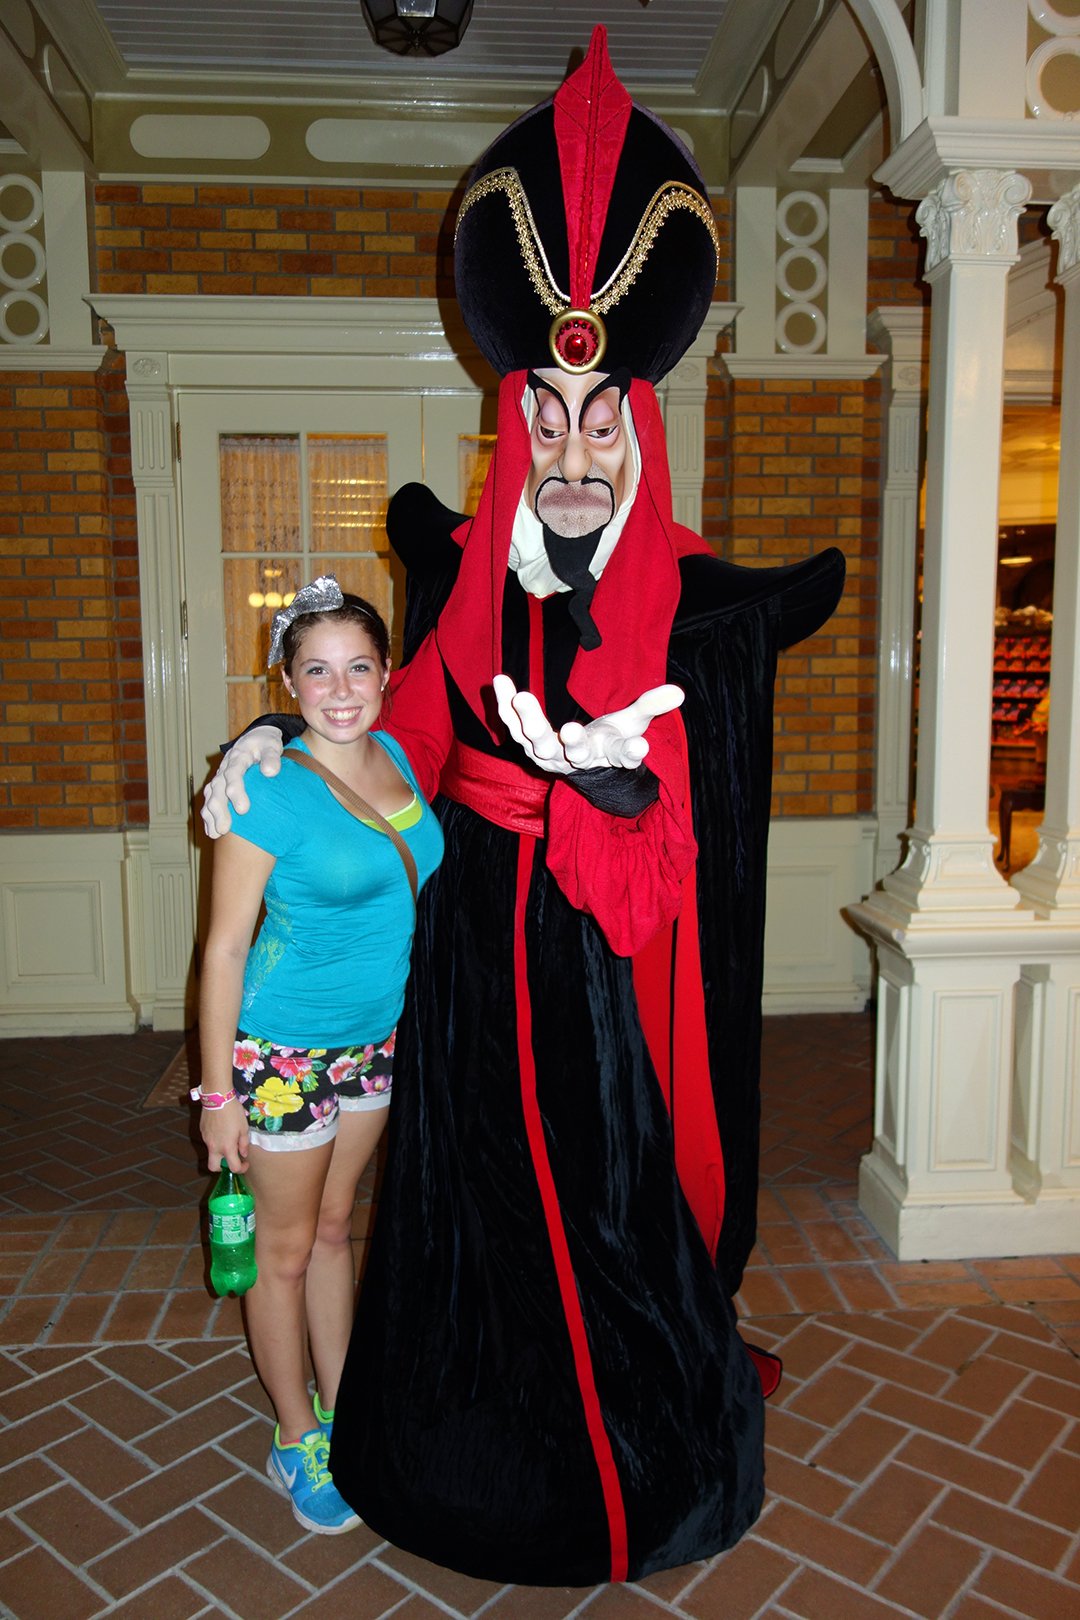 Jafar.  Our intrepid teen reporter only got to meet two characters from running around all over the park taking photos and getting meet and greet times.  Now her photo will be added to the hit list by management like me!